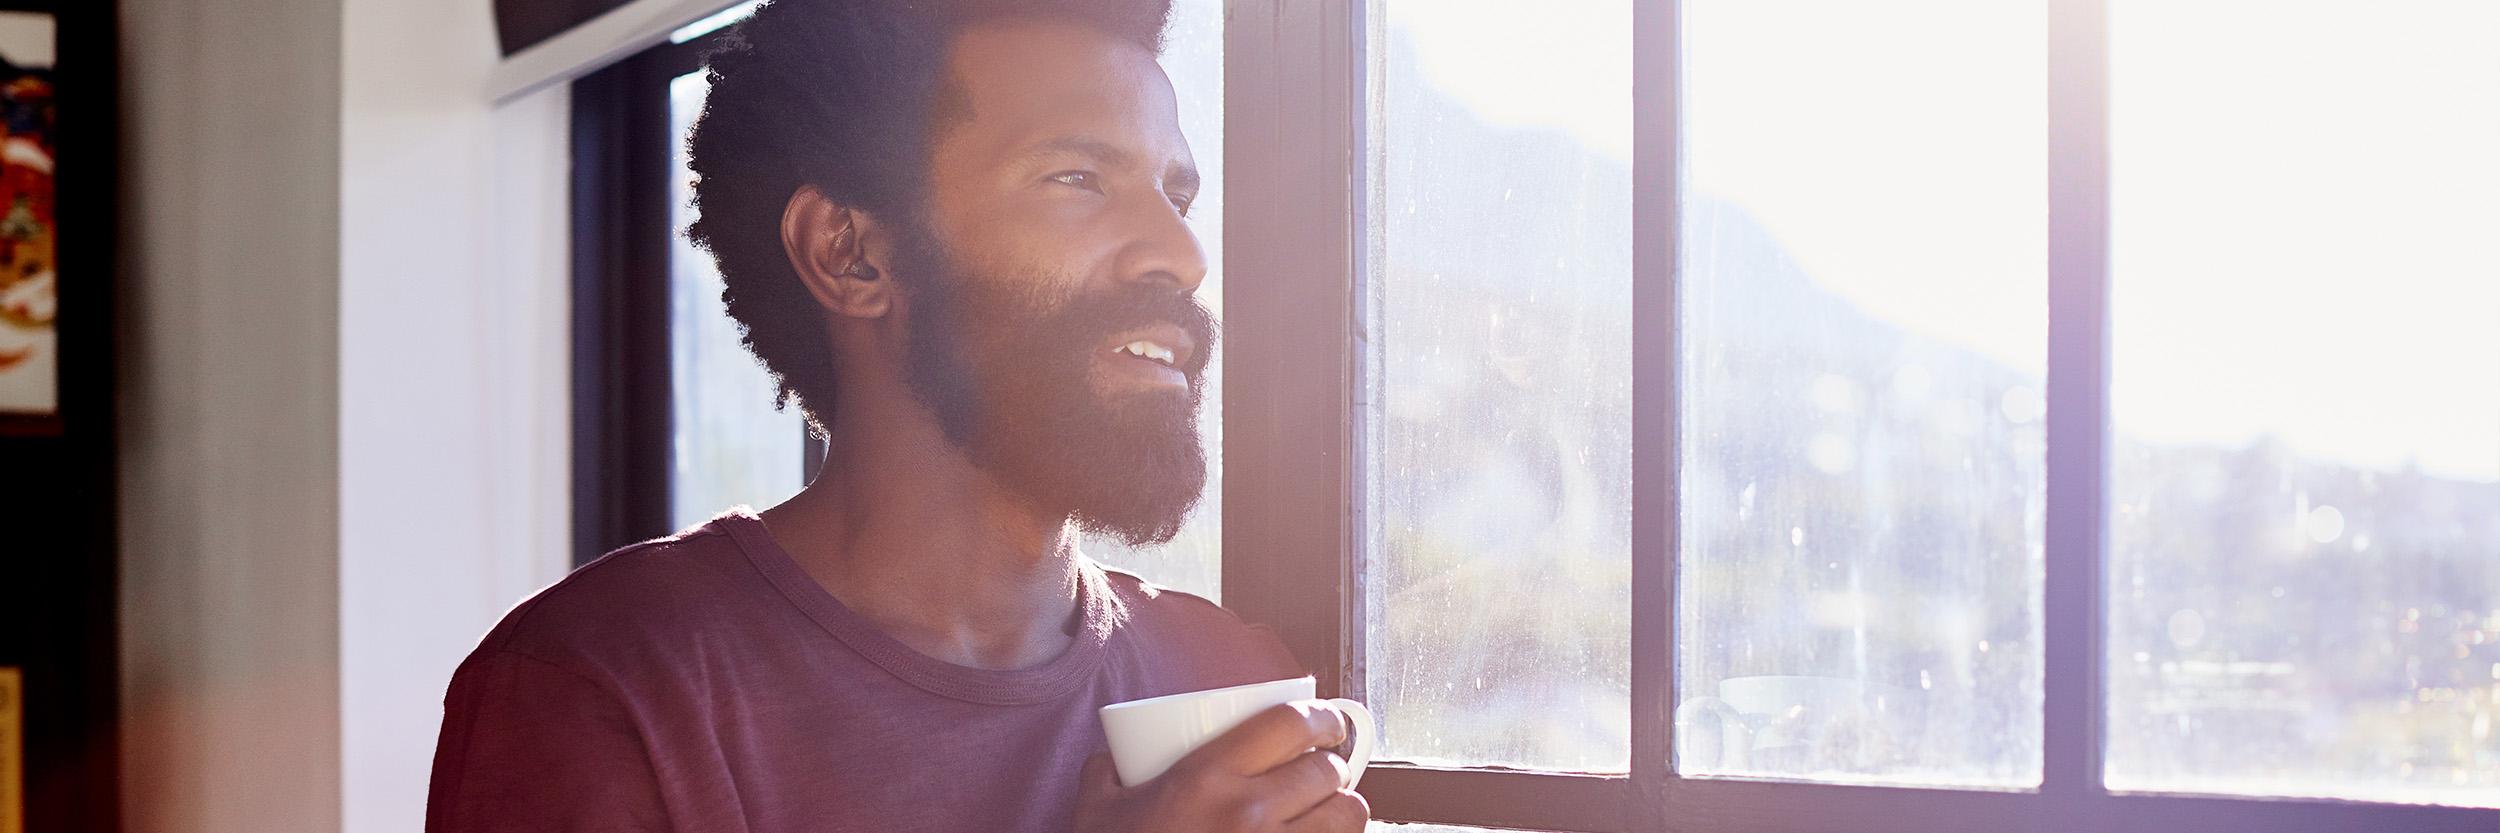 Young man drinking coffee, looking thoughtfully out a window